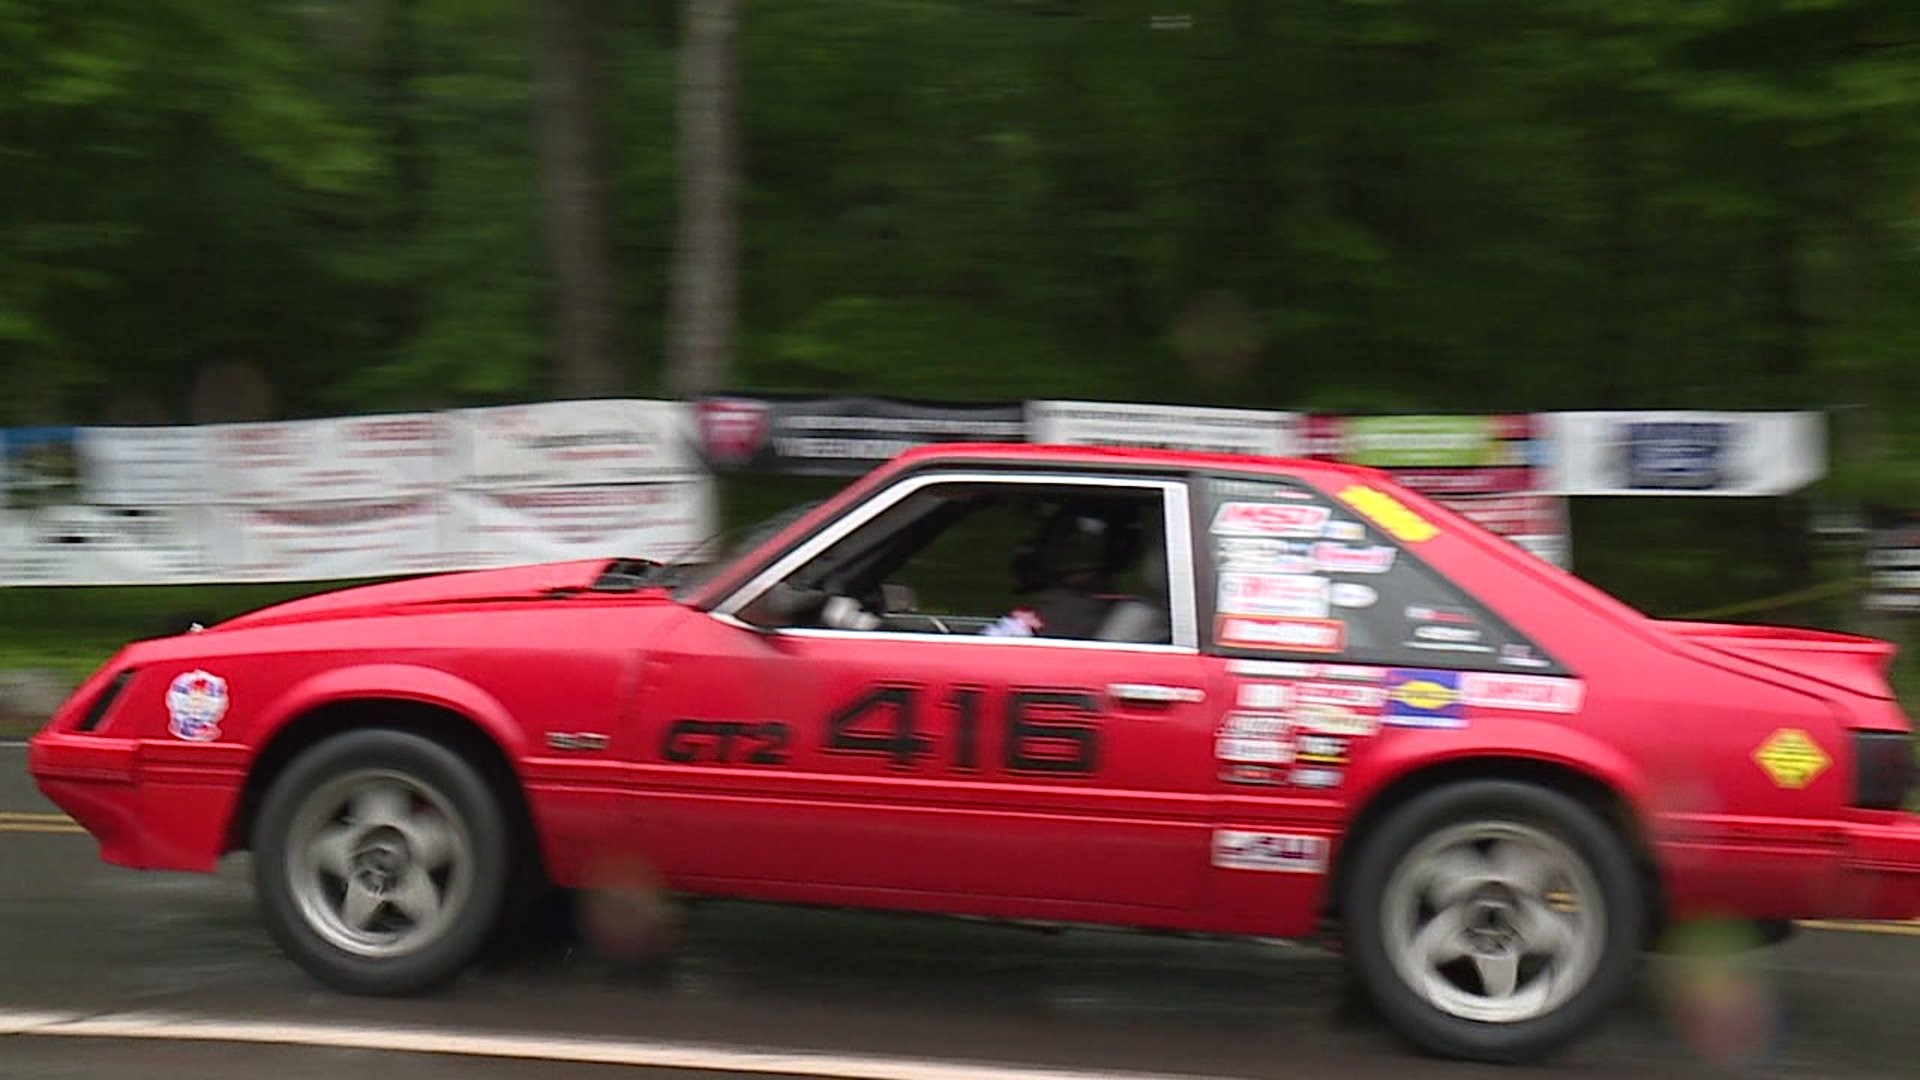 Drivers Tackle Hill Climb in Weatherly